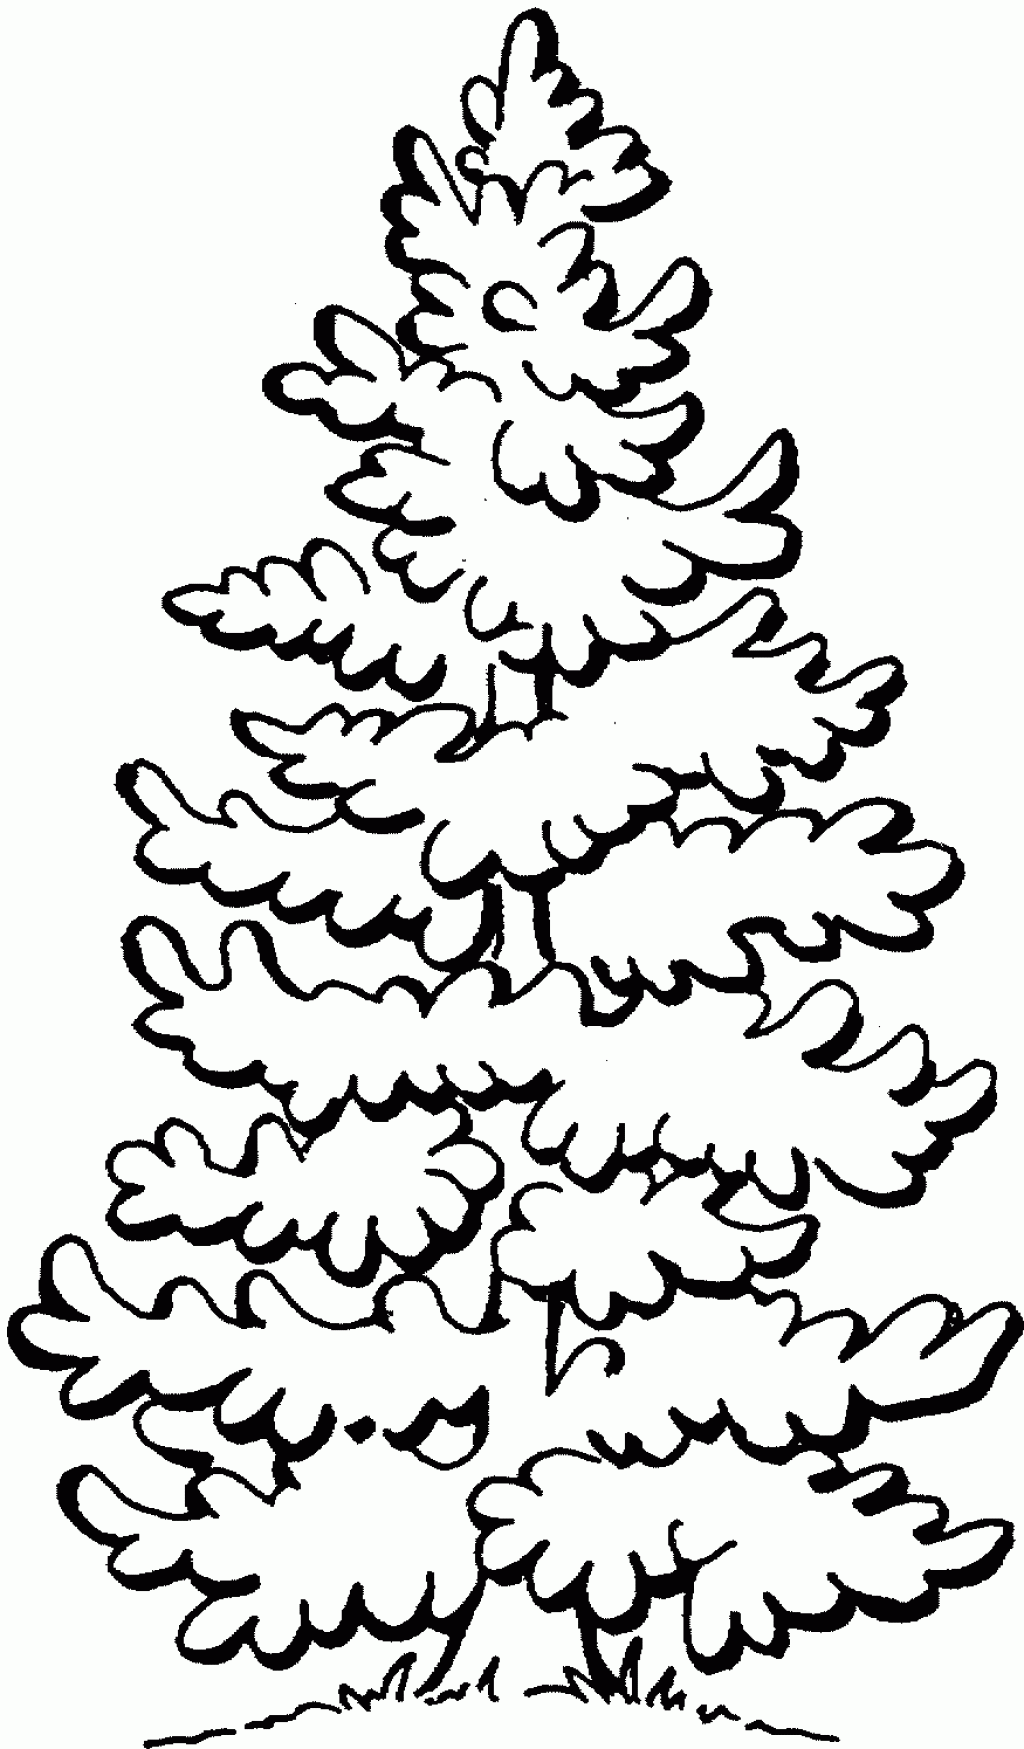 Free Evergreen Tree Outline, Download Free Clip Art, Free Clip Art on Clipart Library